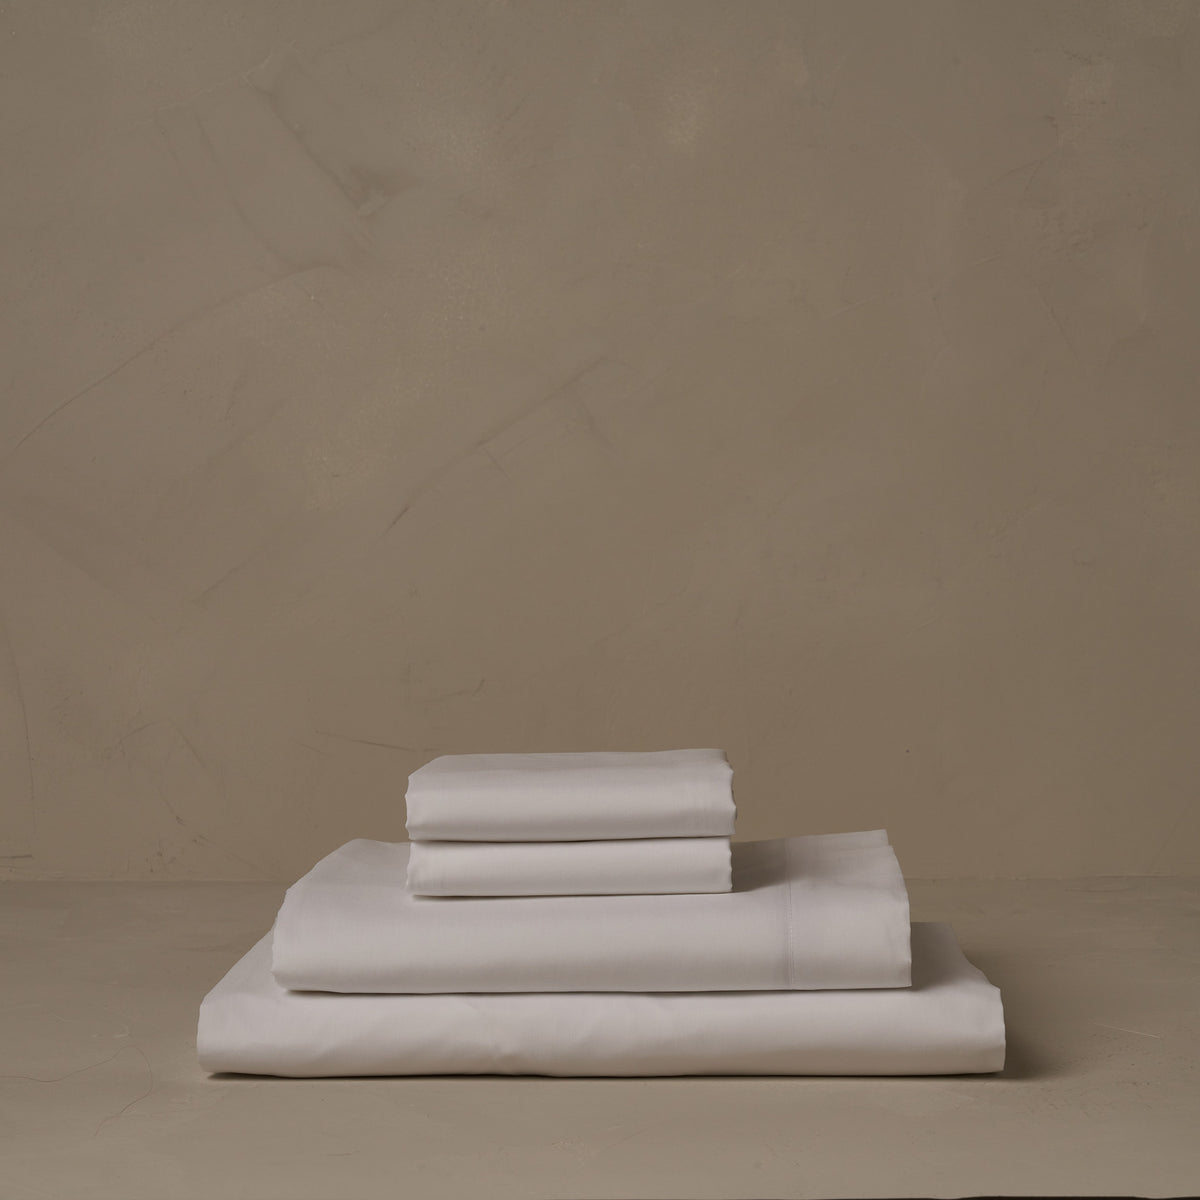 A stack of cool and crisp LETTO Giza Reserve Cotton Percale sheets in white, made in Italy. The sheet set includes a fitted sheet, a flat sheet, and a pair of pillowcases. data-image-id=